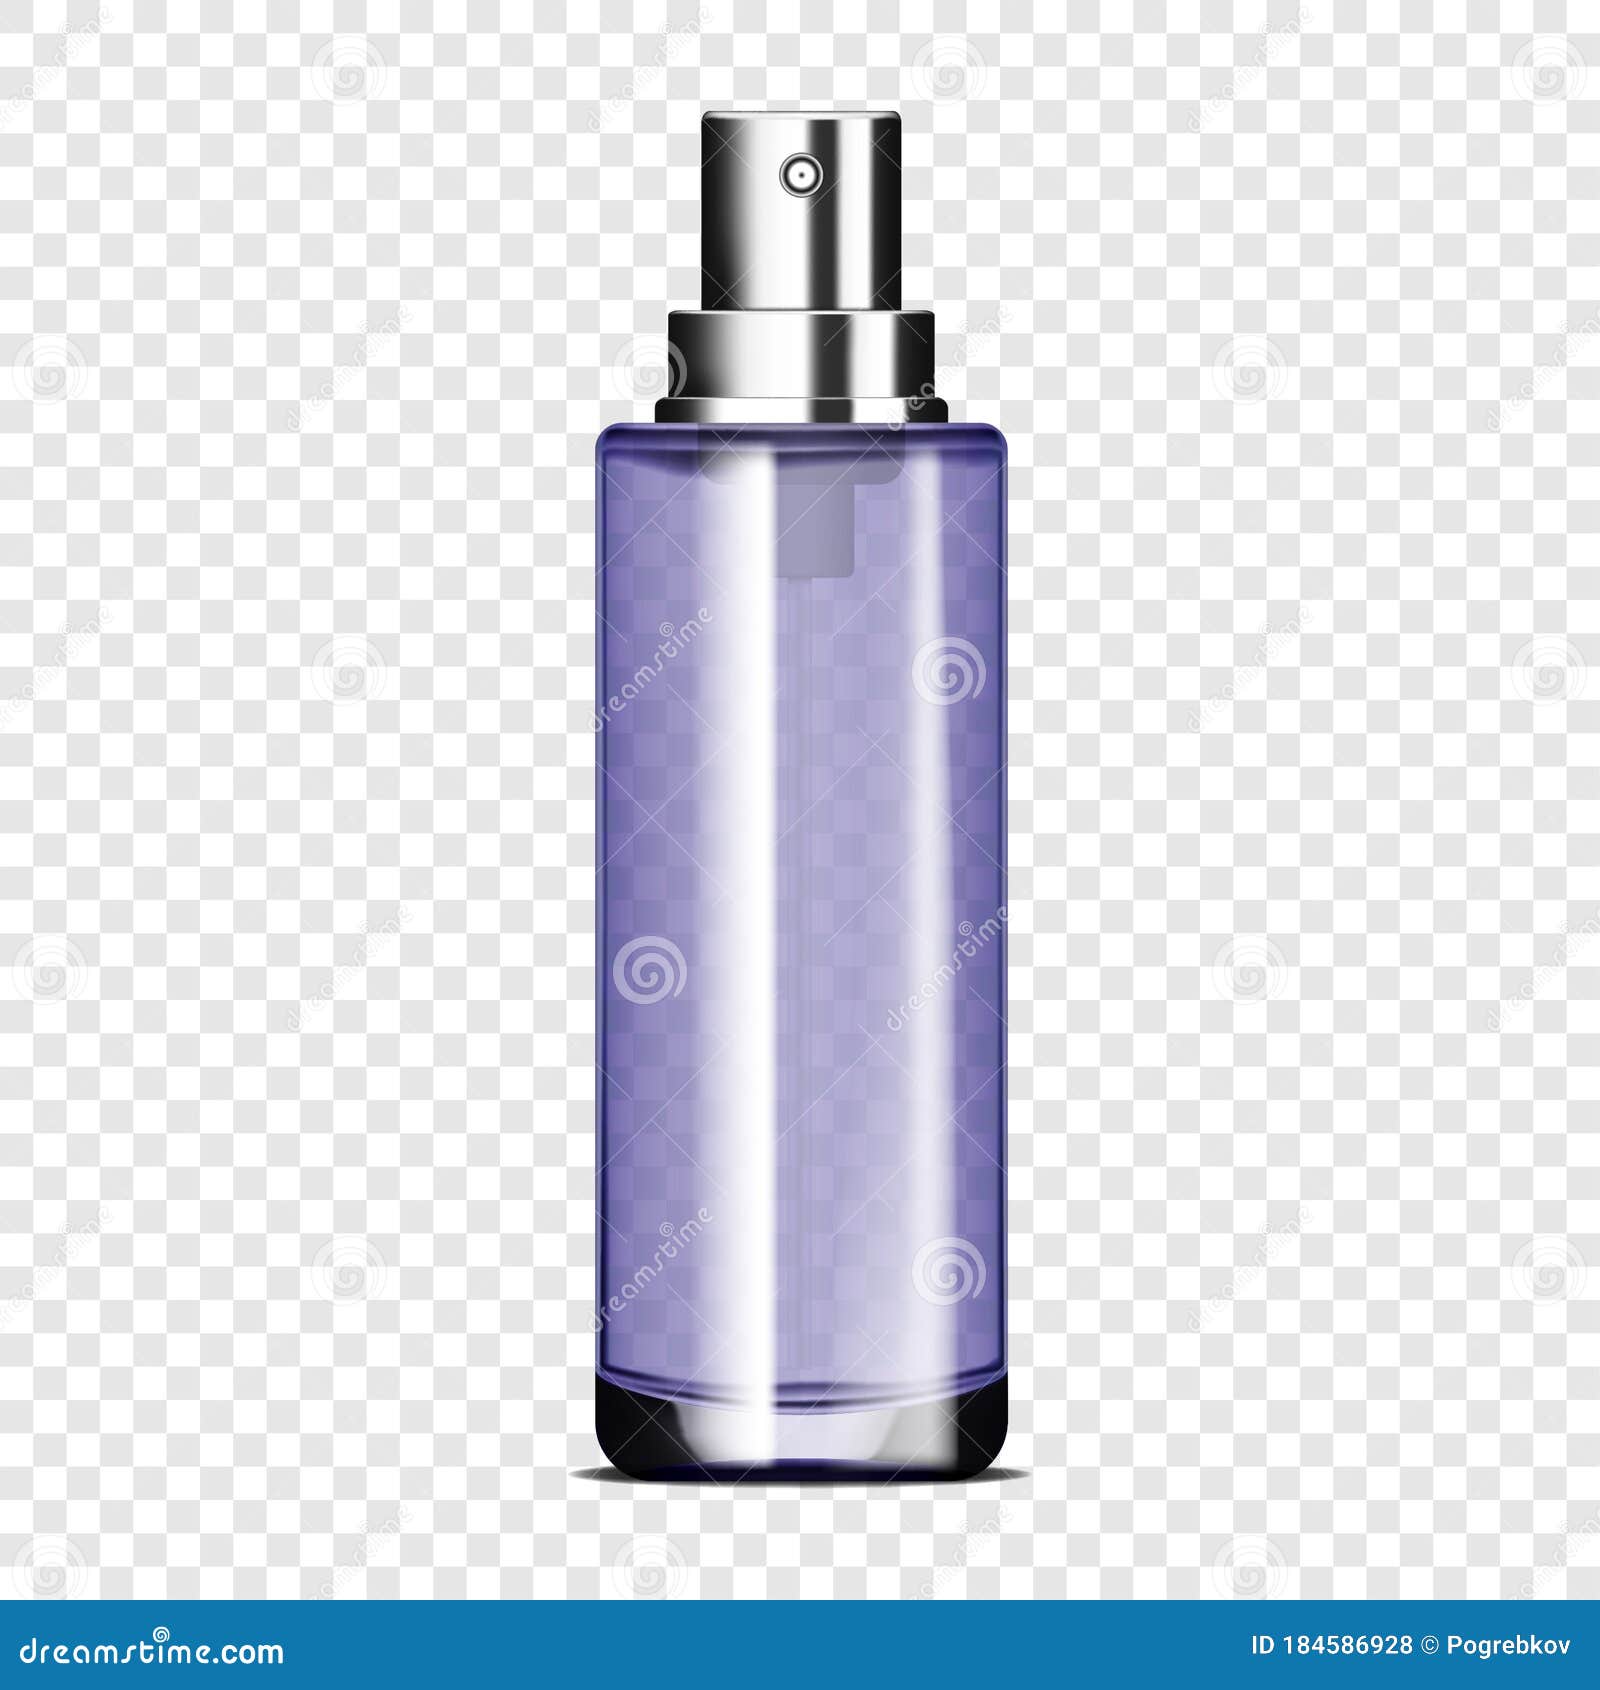 Download Clear Glass Spray Bottle On Transparent Background, Vector ...